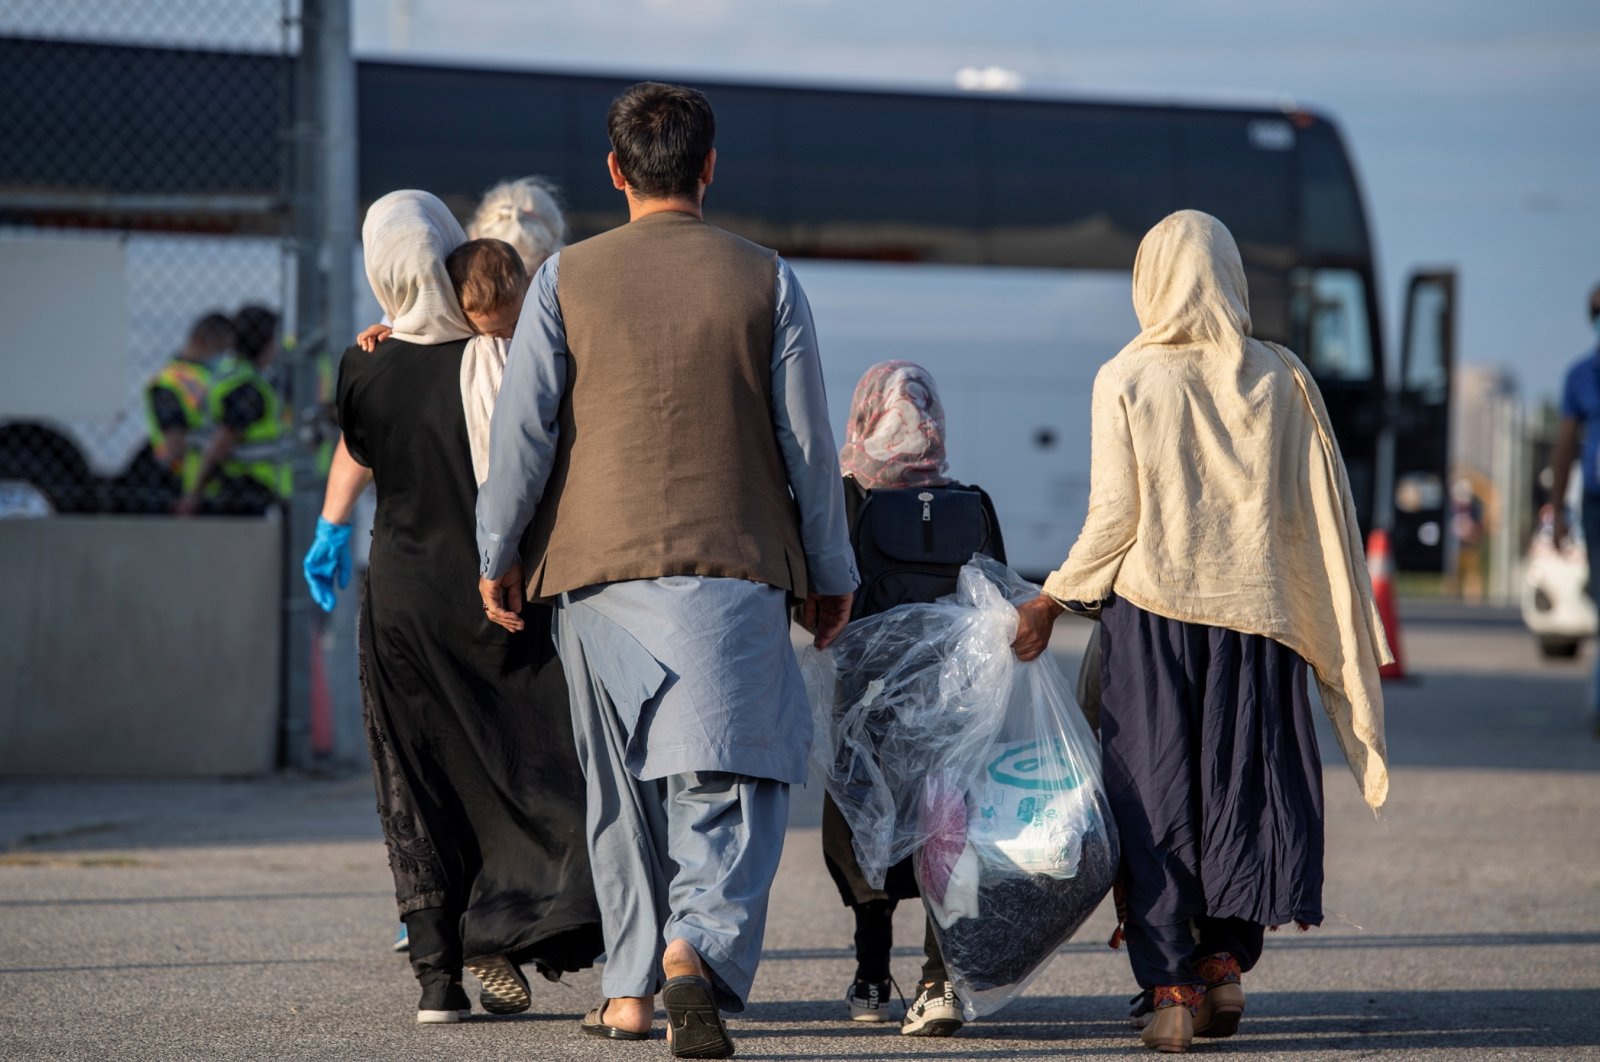 Afghan refugees who supported Canada's mission in Afghanistan arrive at Toronto Pearson International Airport, Toronto, Canada, on Aug. 24, 2021. (Canadian Armed Forces Handout via Reuters)